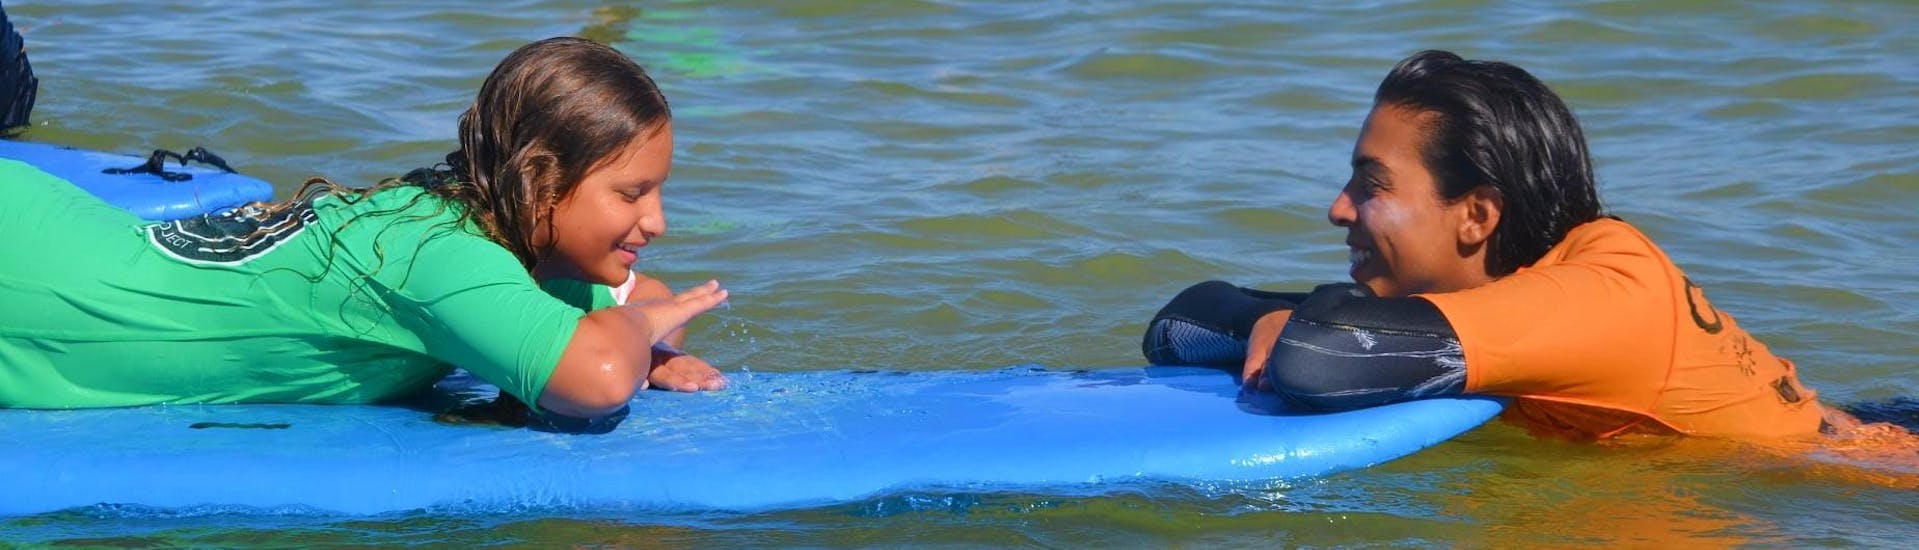 A surf instructor from Vilamoura Surf Project teaches a student the right technique in the water during the Surfing Lessons at Praia da Falésia for all Levels.